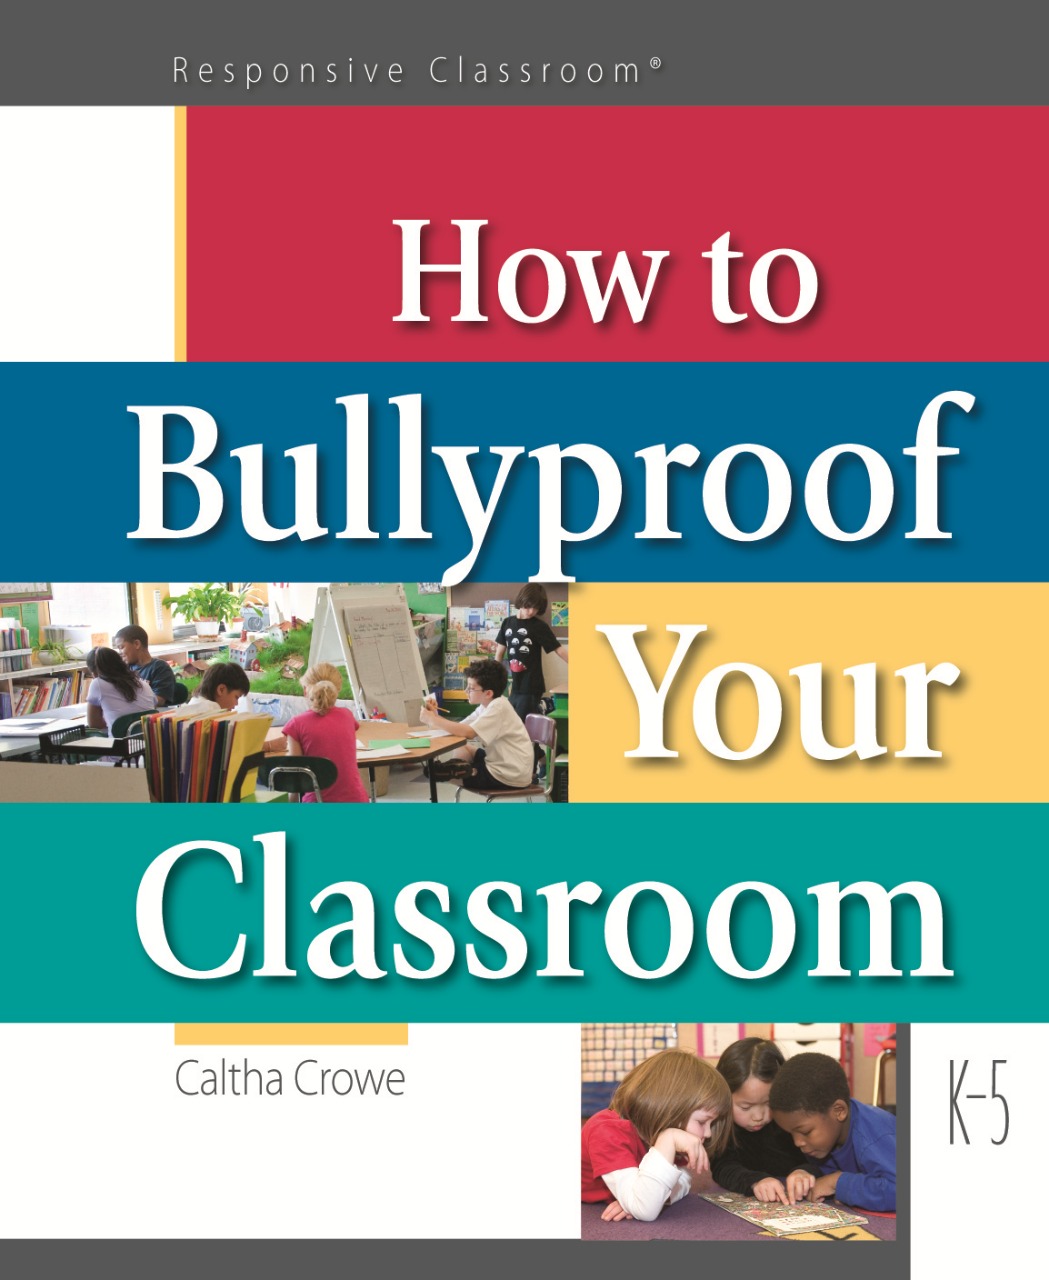 How to Bullyproof Your Classroom